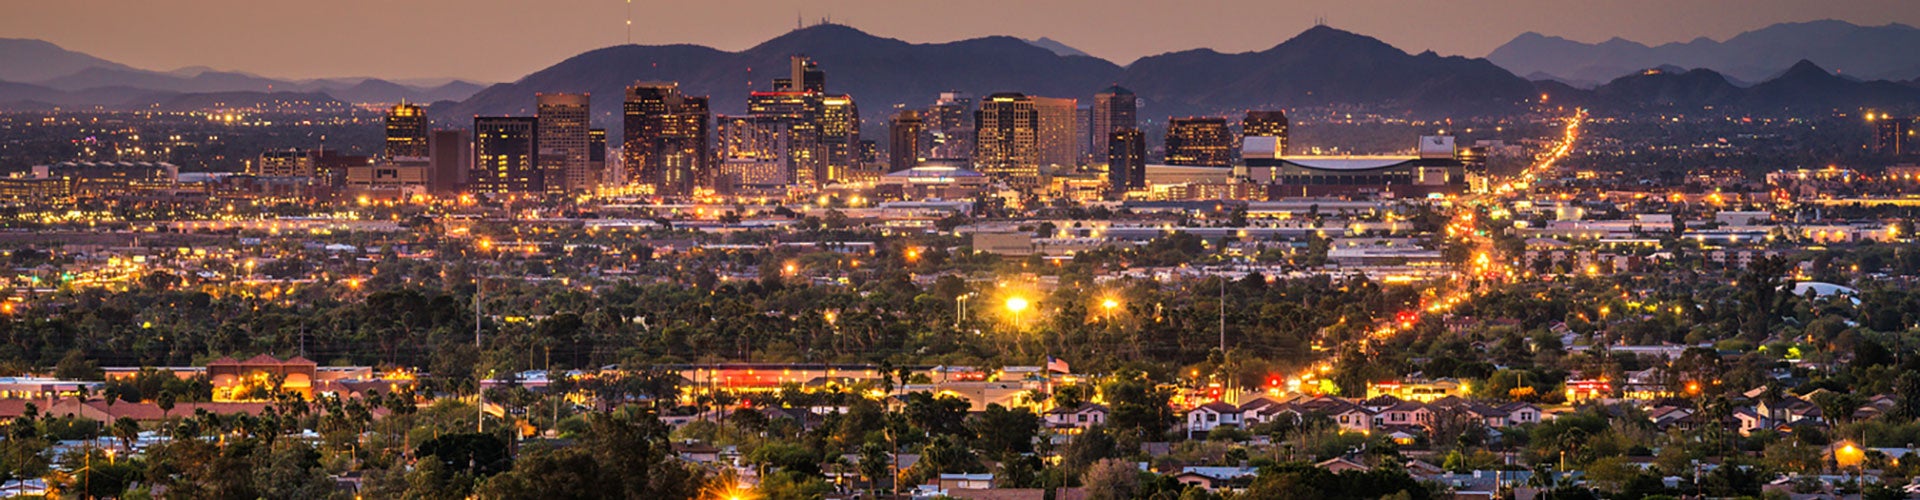 View of light in downtown Phoenix at dusk